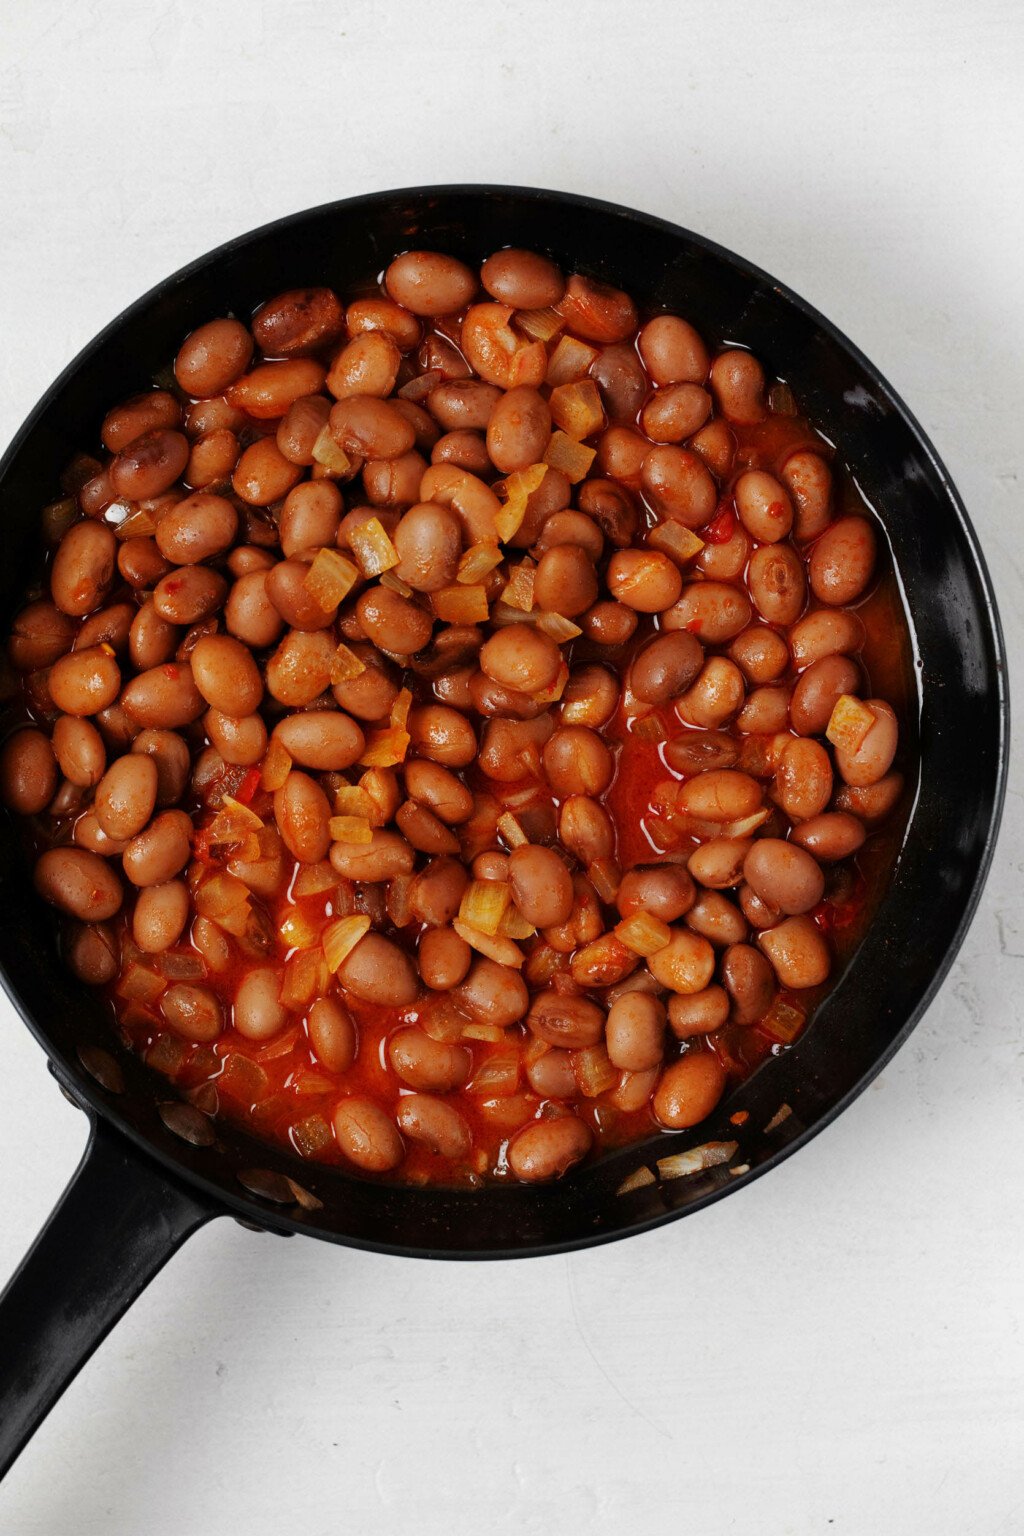 A cast iron skillet is filled with pinto beans, tomato, and spices.